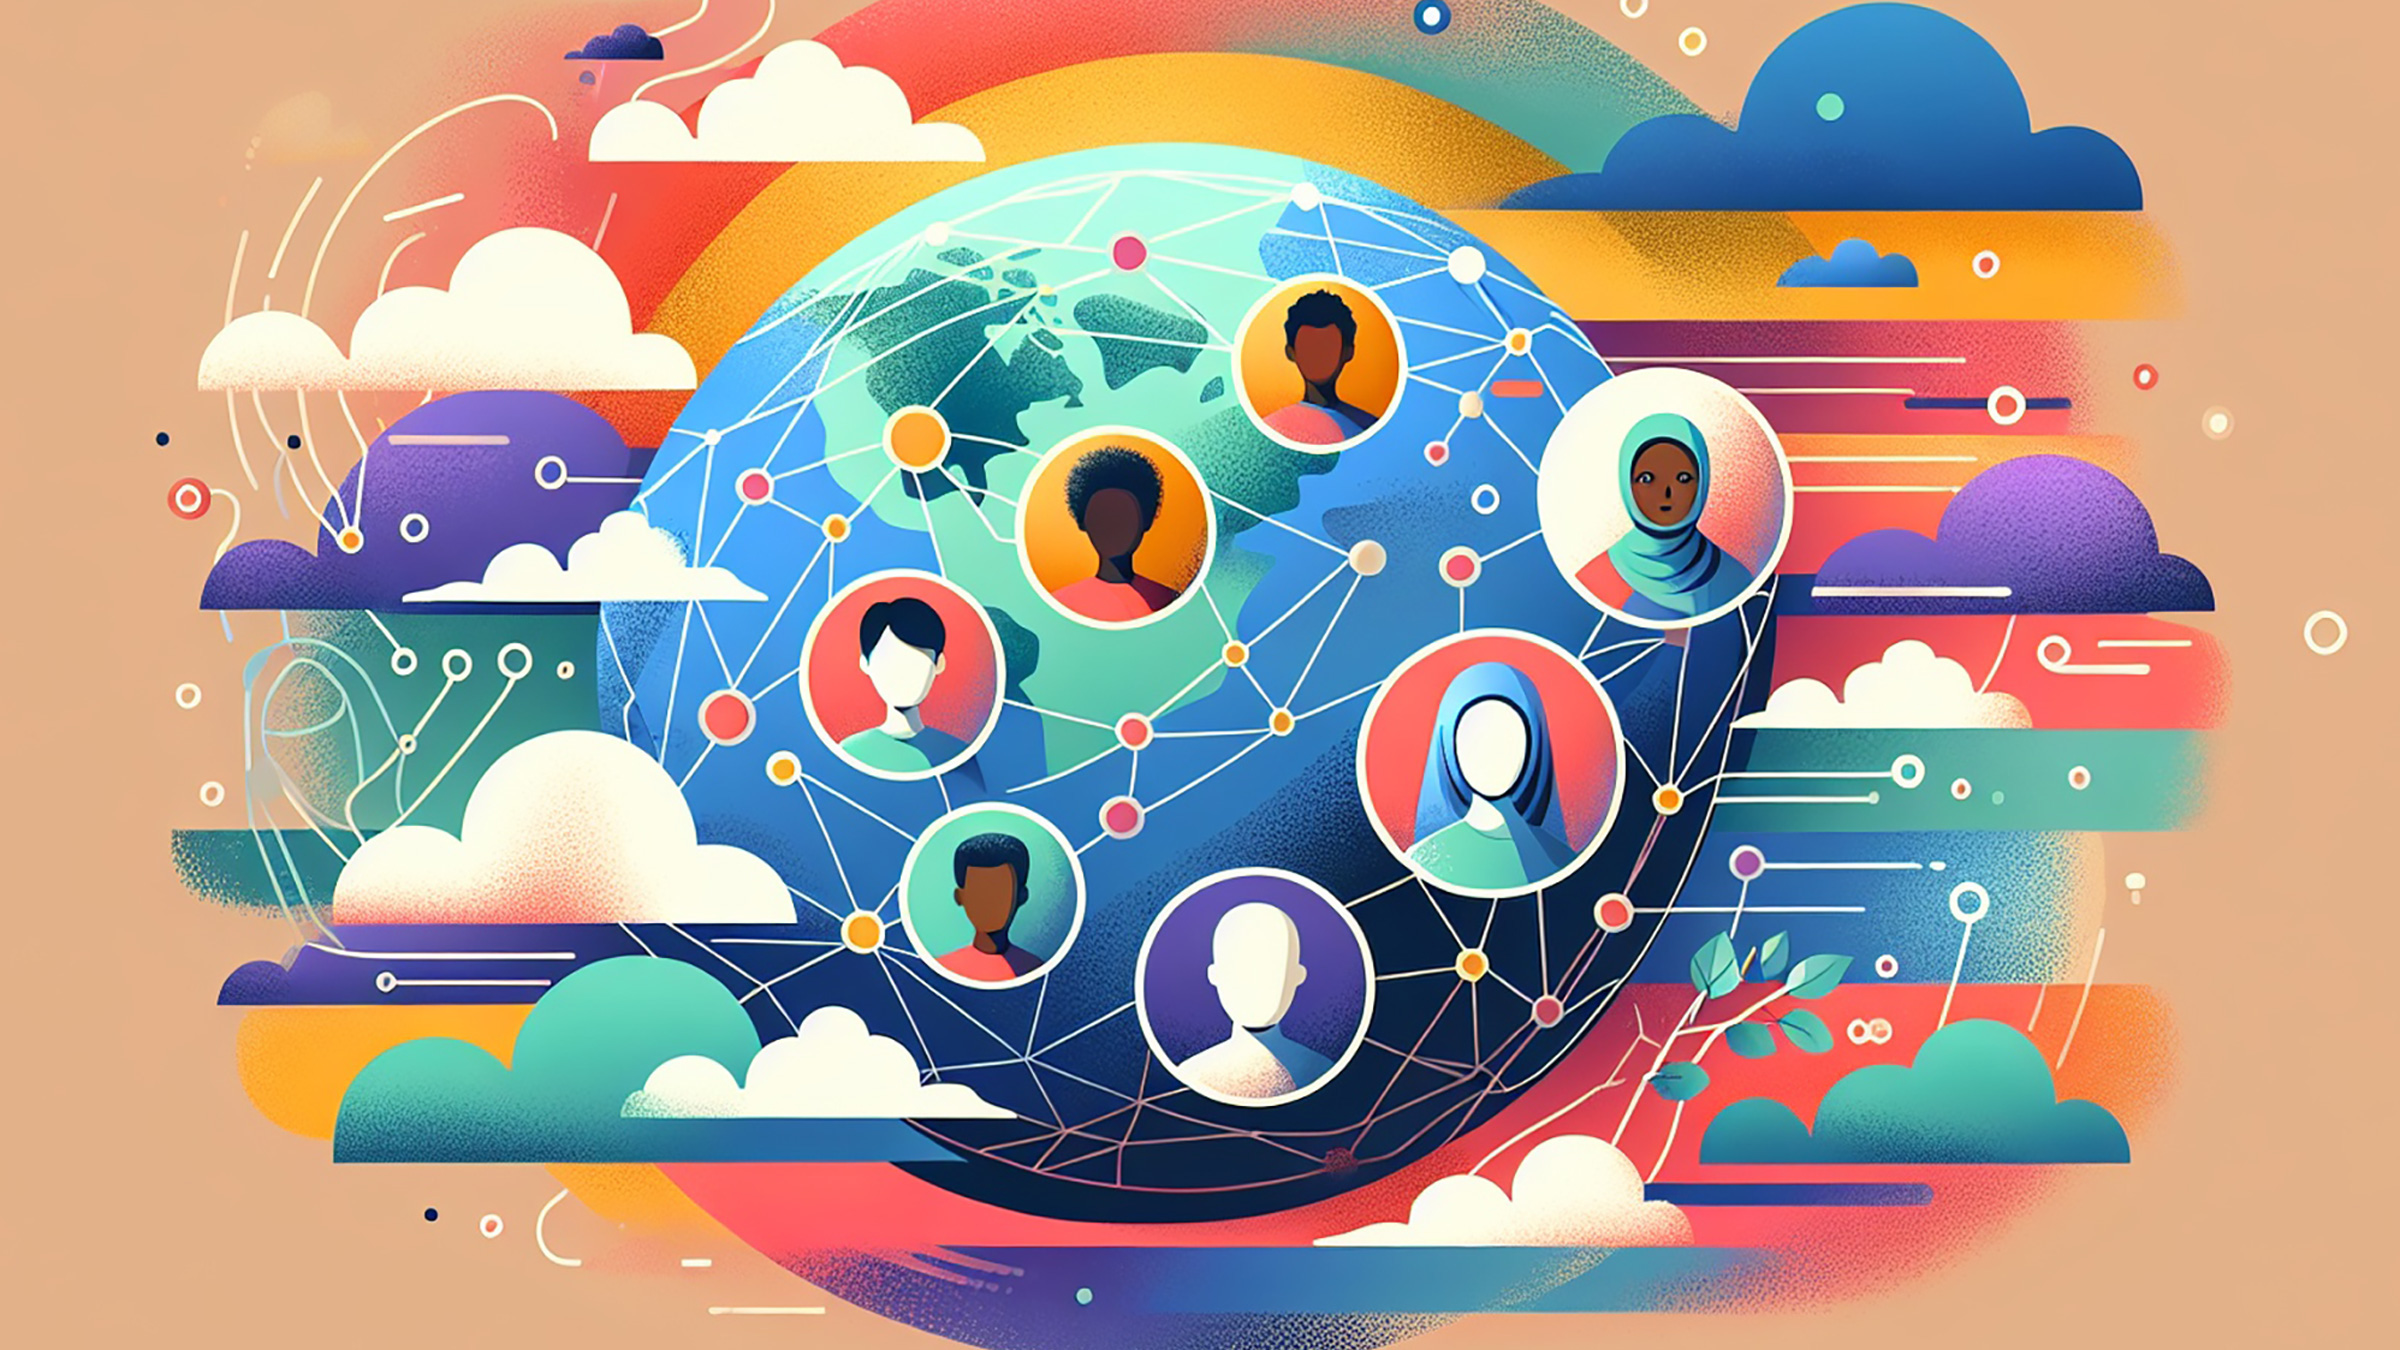 encircled faces and clouds above the Earth and a connected network, illustration